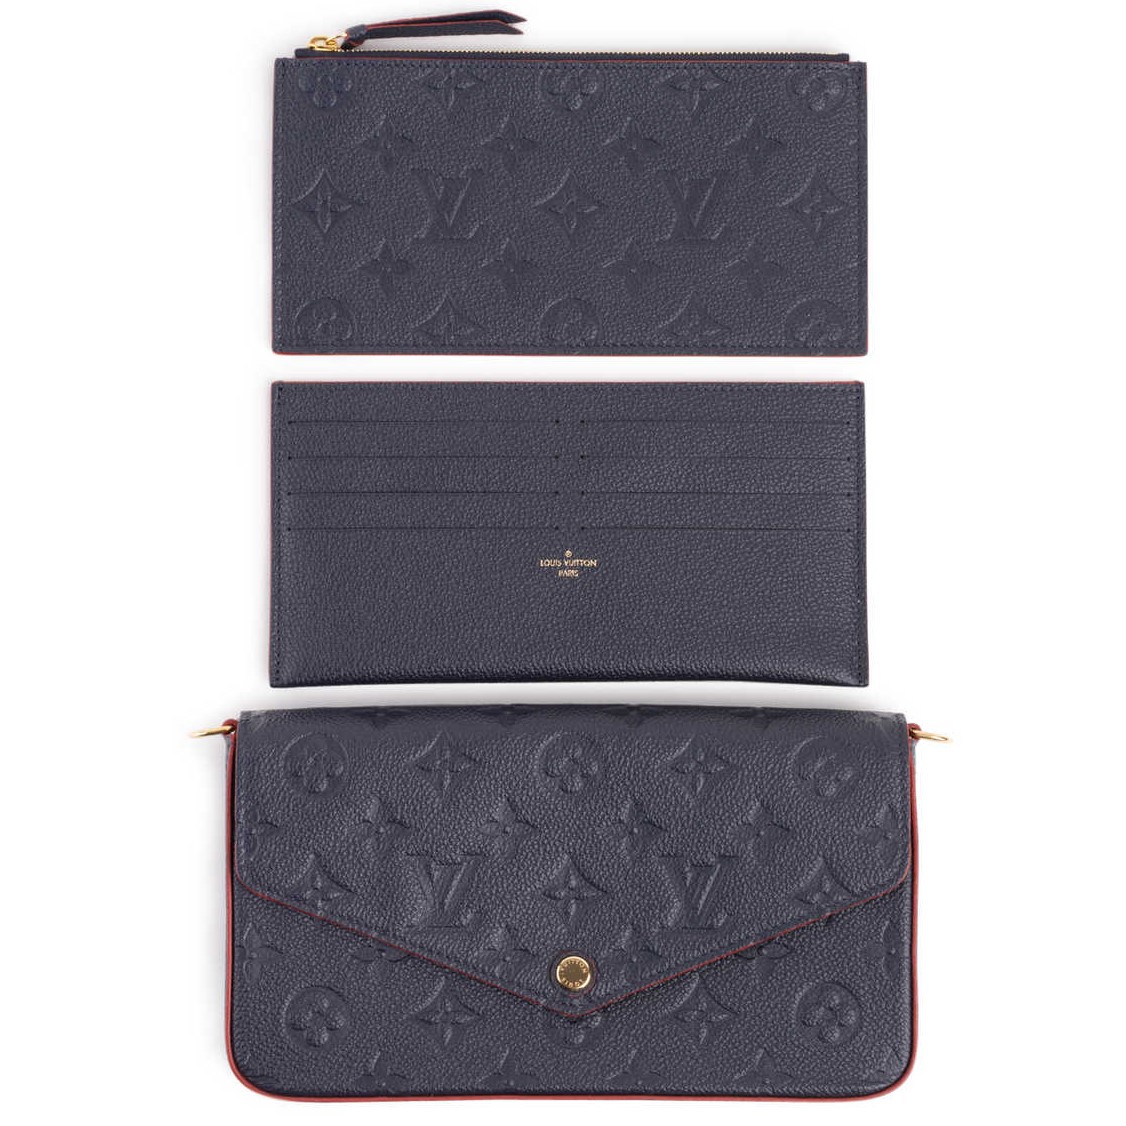 TÚI ĐEO CHÉO NỮ LV LOUIS VUITTON FÉLICIE POCHETTE MARINE ROUGE MONOGRAM EMPREINTE LEATHER WALLETS AND SMALL LEATHER GOODS M64099 15